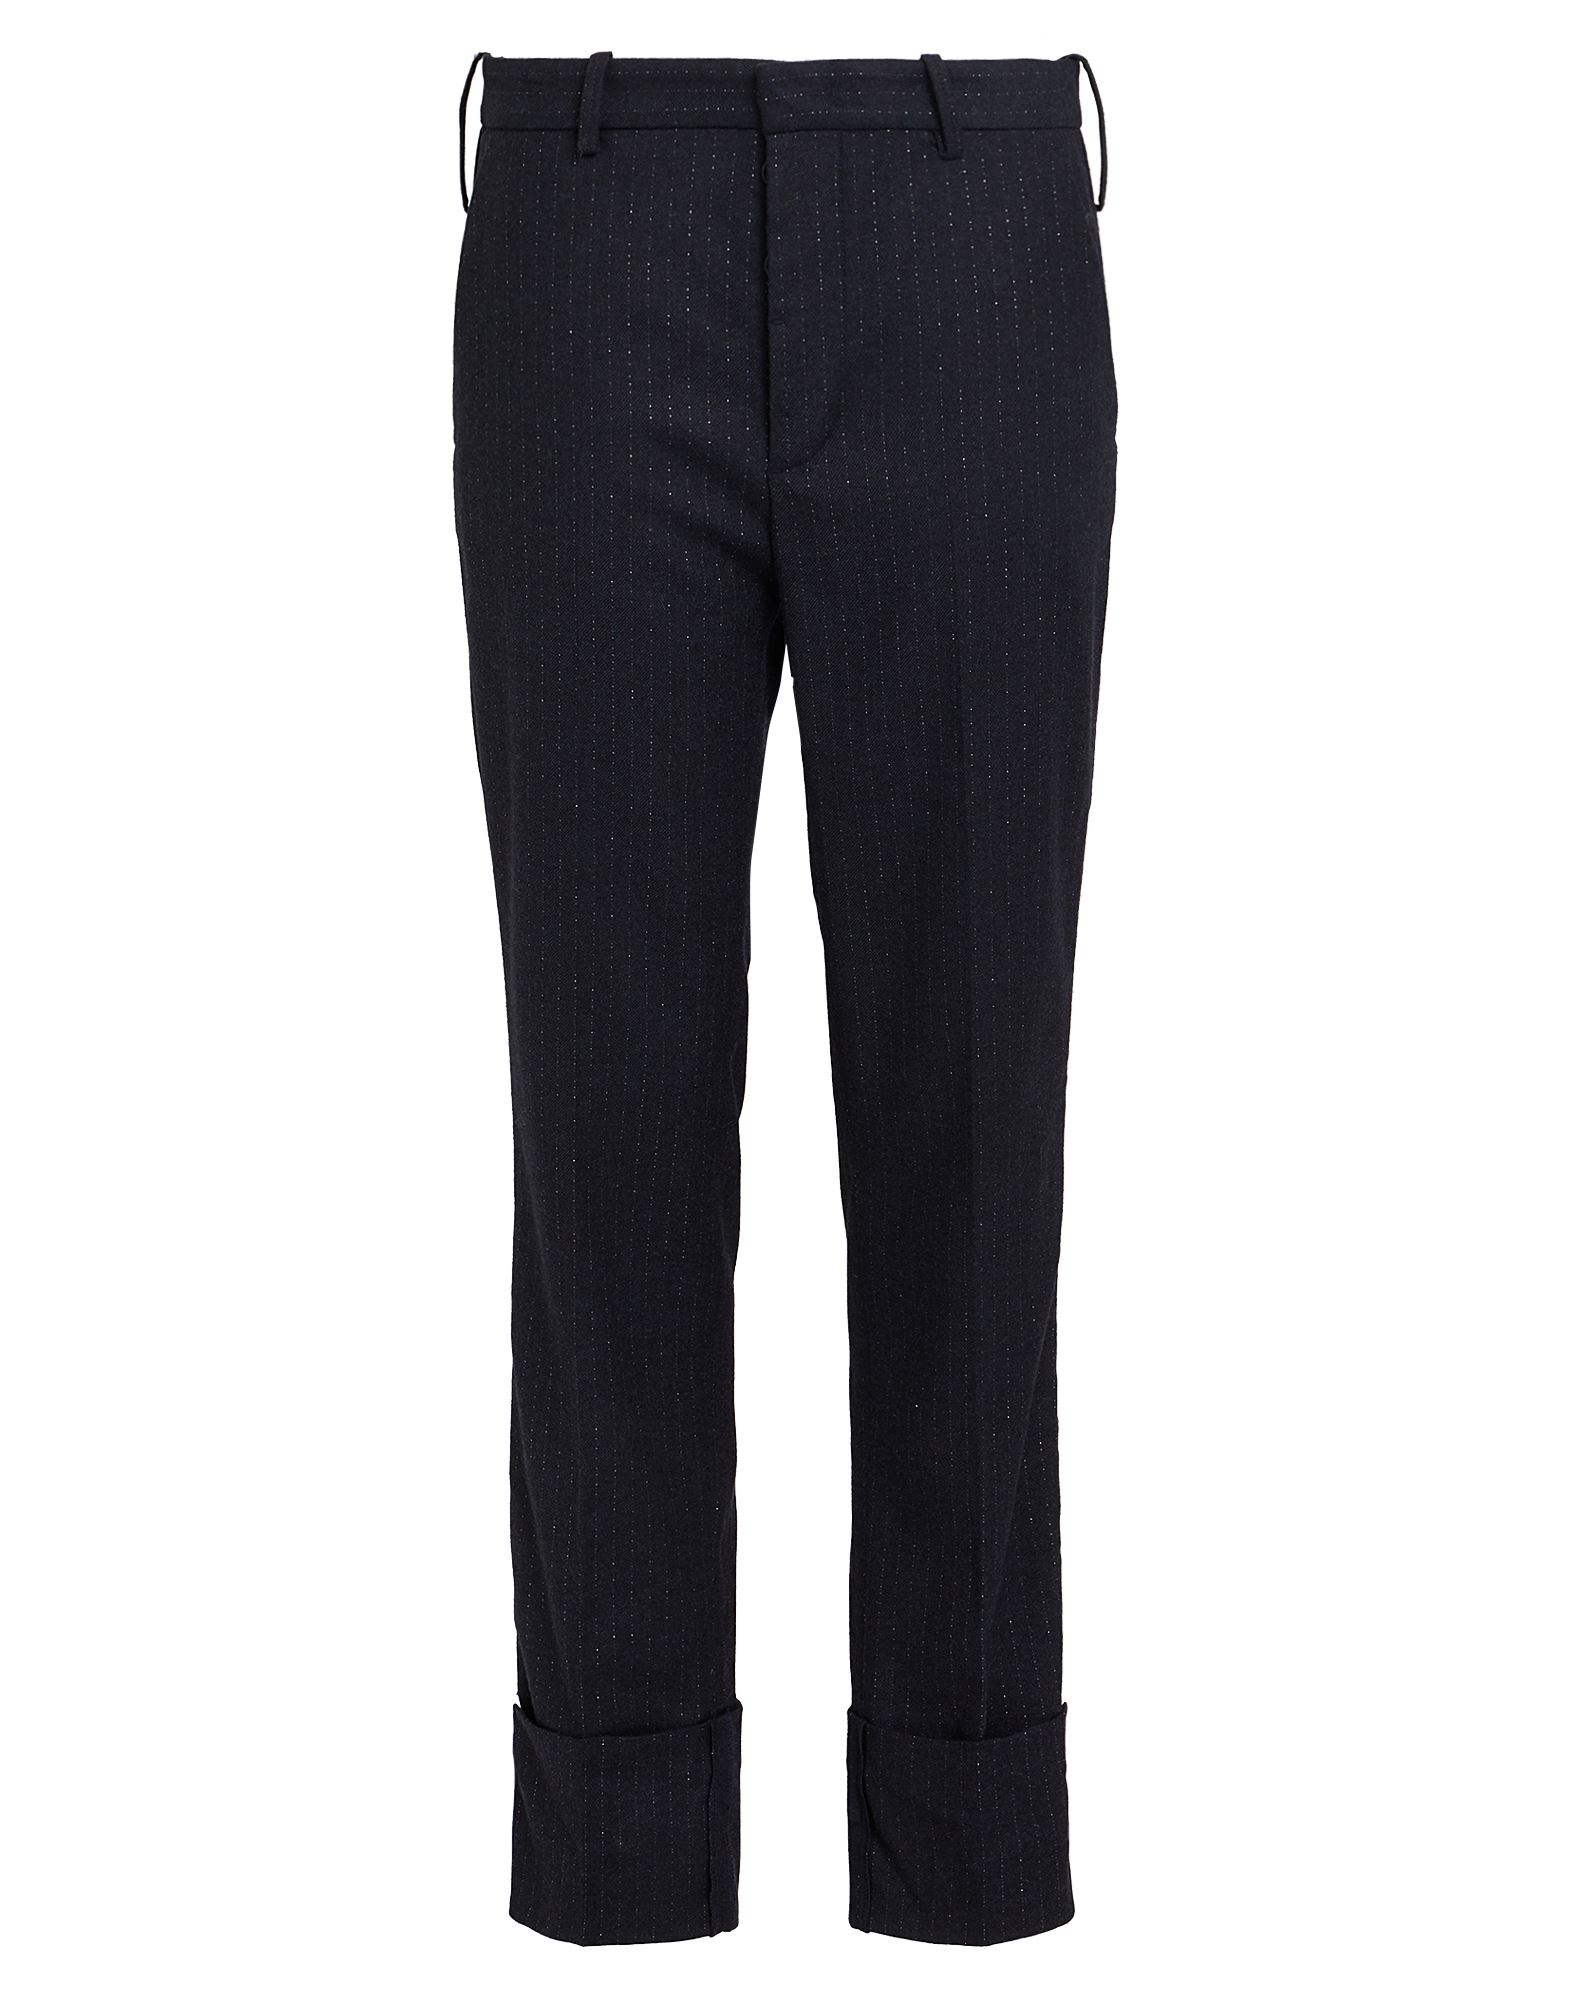 ZADIG & VOLTAIRE ZADIG & VOLTAIRE WOMAN PANTS MIDNIGHT BLUE SIZE 6 WOOL, POLYESTER, VISCOSE, COTTON, ELASTANE,13189586XJ 5